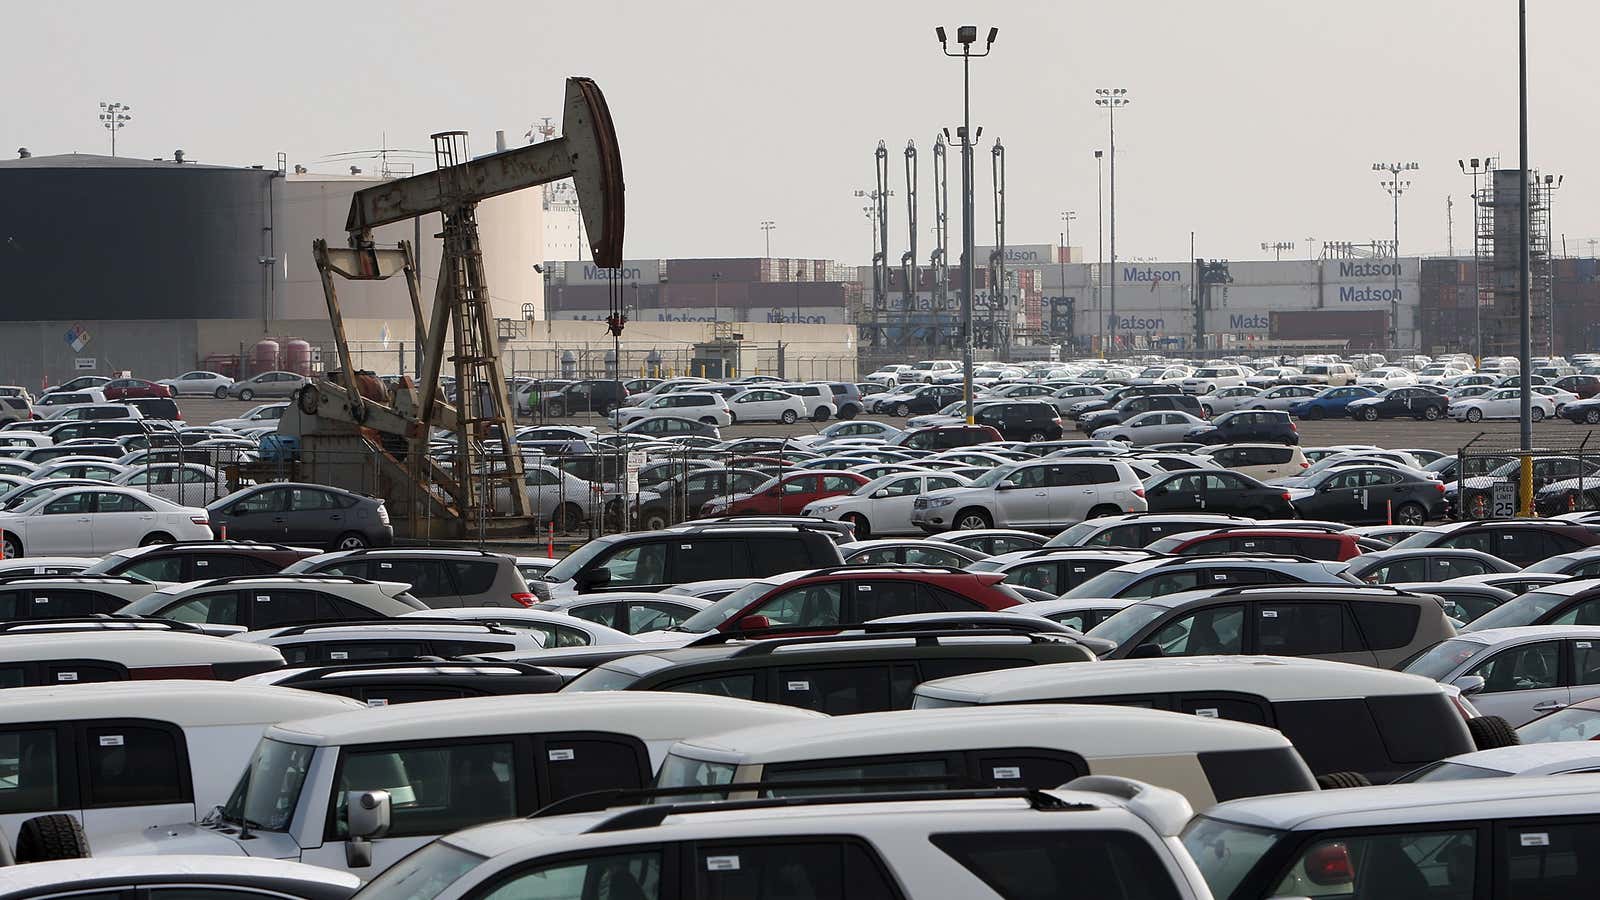 An oil well extracts light sweet crude from the ground beneath newly imported cars at the Port of Long Beach.